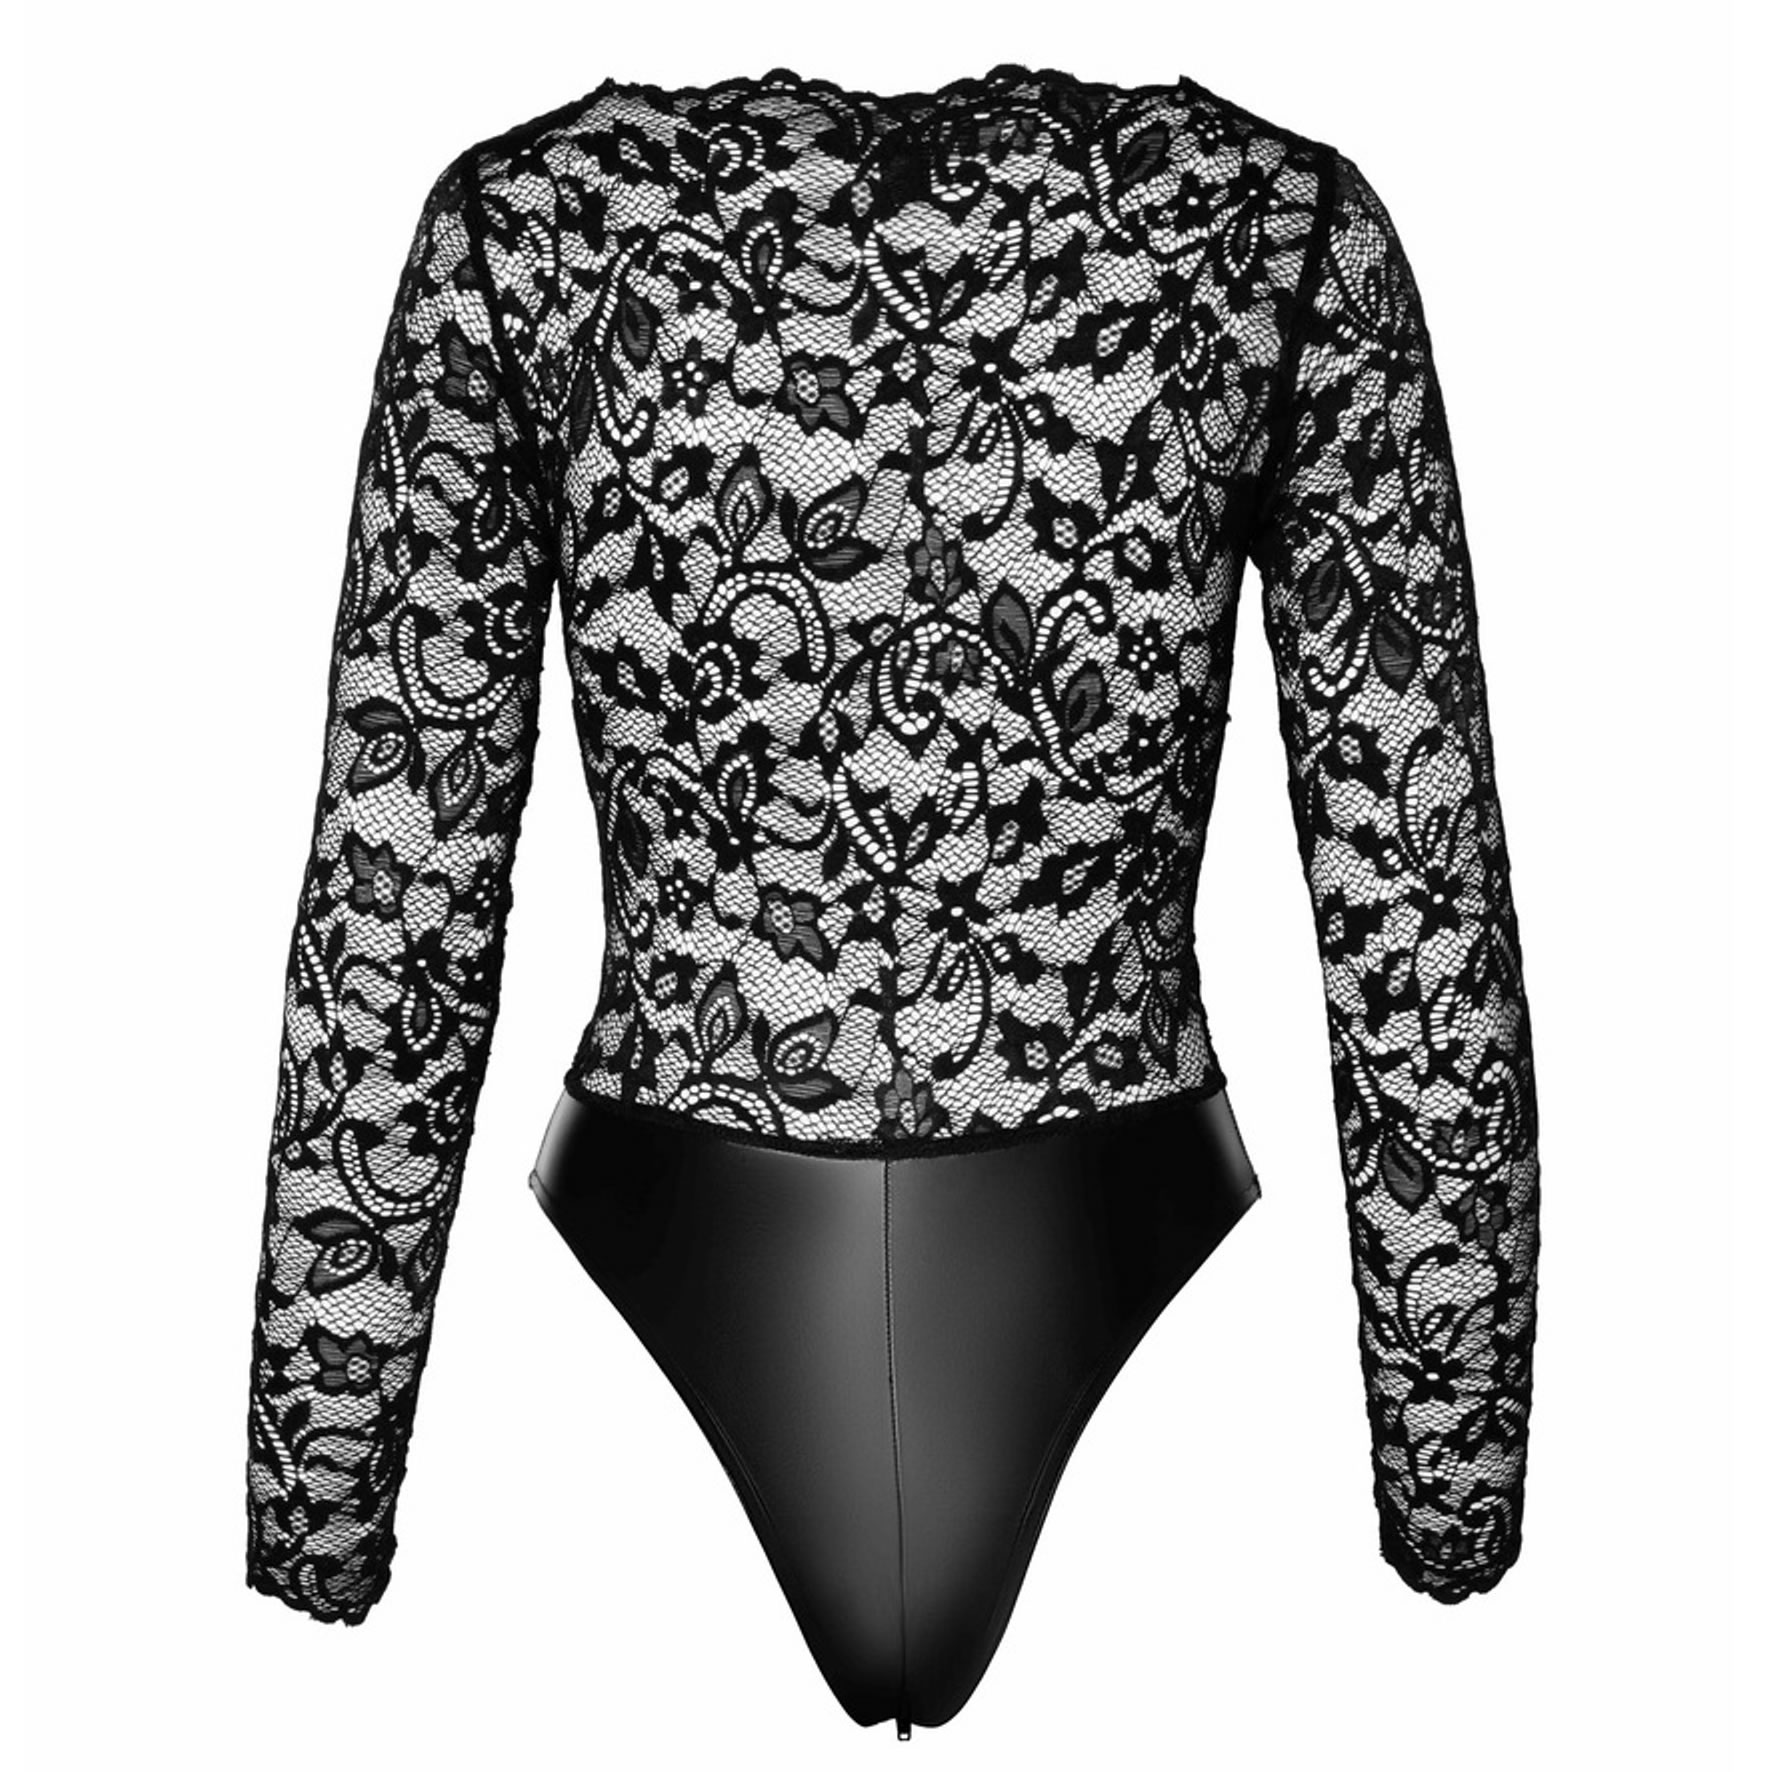 Noir Wetlook and Lace Body with Crotch Zipper